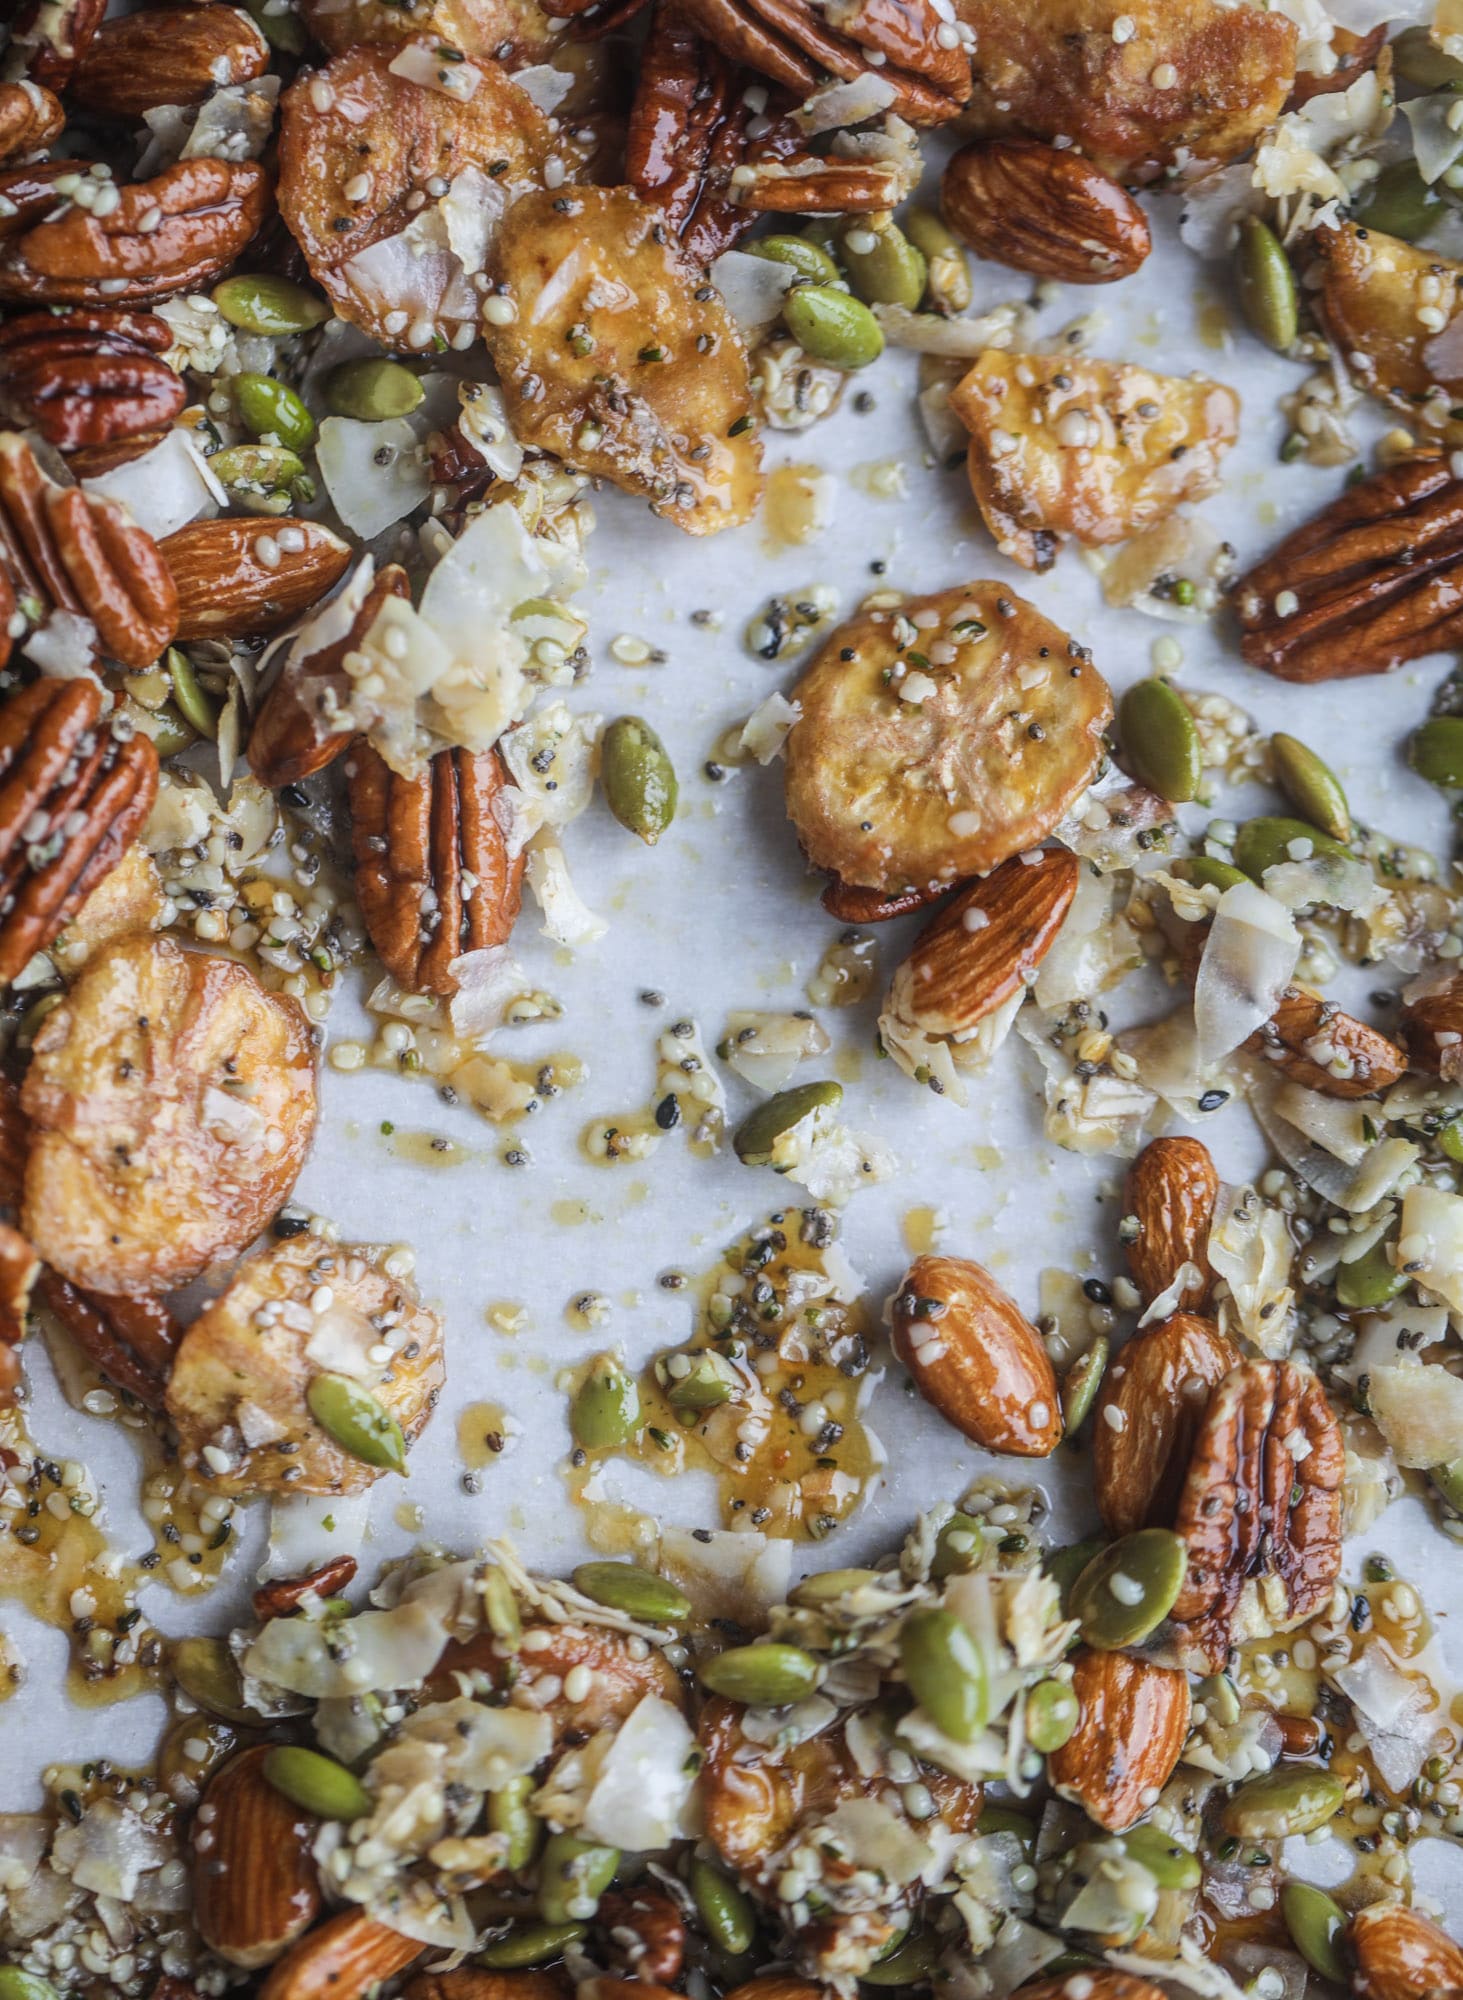 This delicious healthy snack mix is perfect to prep for snacks on the go! It's satisfying, flavorful, both sweet and savory and the best part - is super crunchy. It's full of nuts, some fruit, a bit of coconut, spices, hemp hearts and chia! I howsweeteats.com #healthy #trailmix